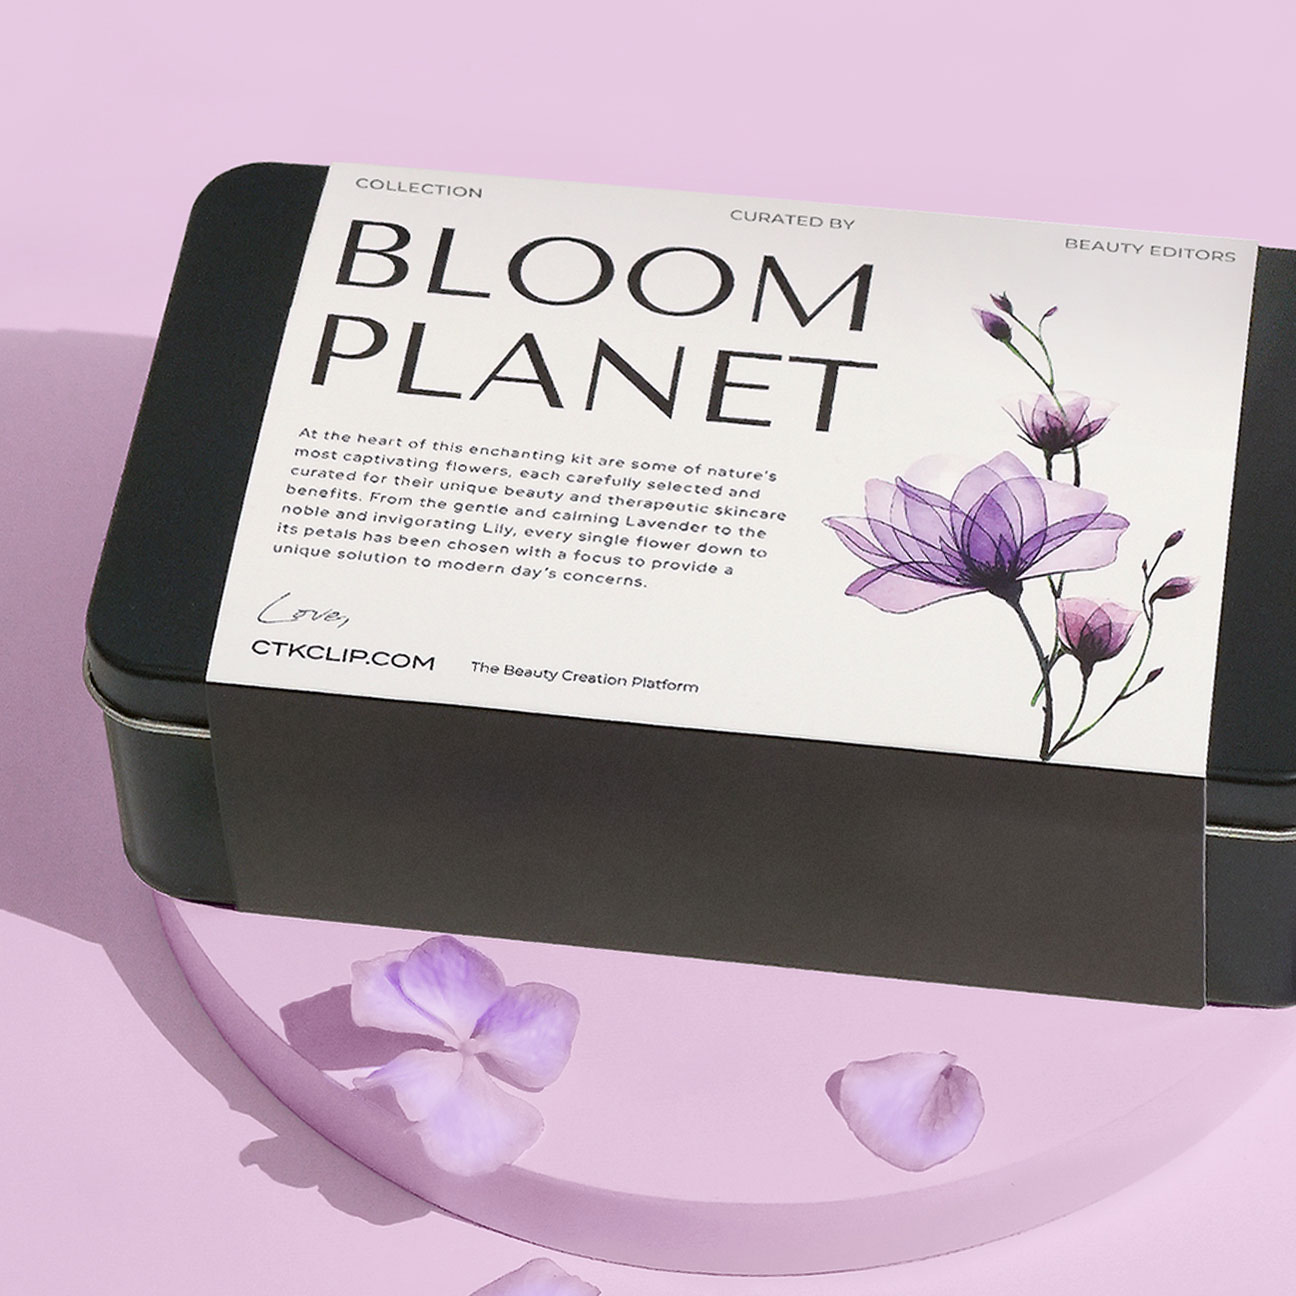 Bloom Planet Collection image 1